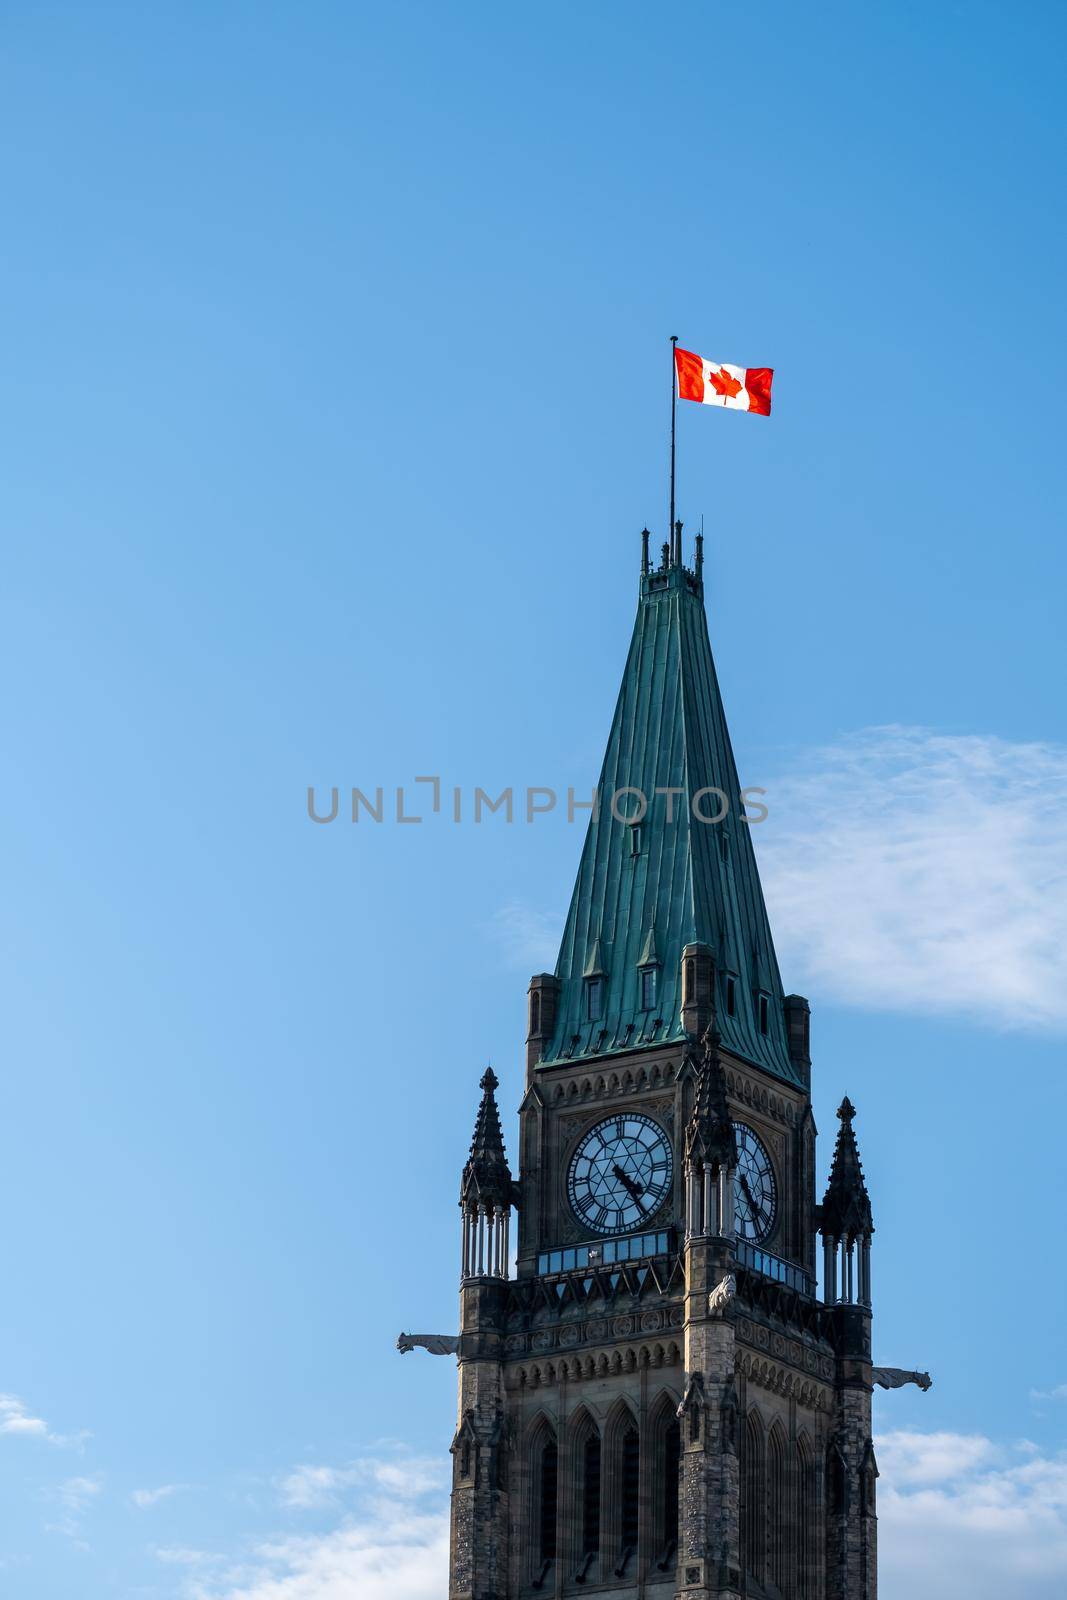 Peace Tower in Ottawa, Canada against blue sky with clouds by colintemple